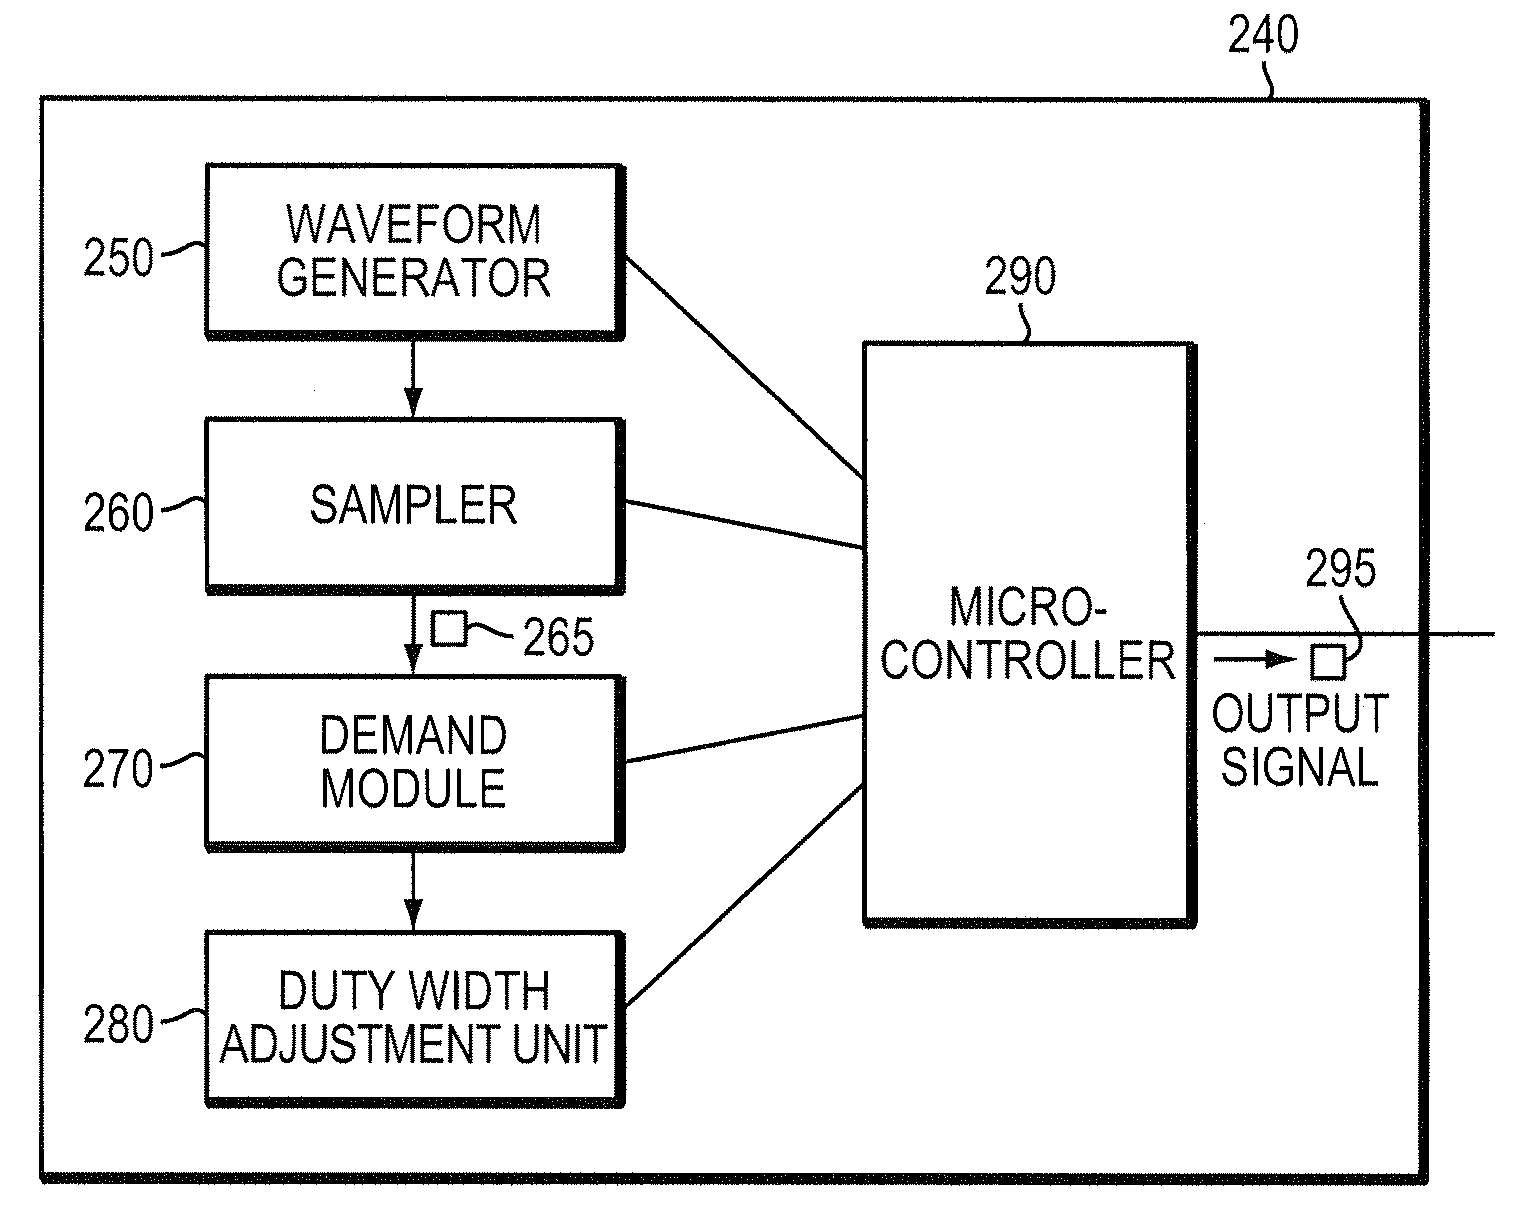 Method and apparatus for providing a power factor correction (PFC) compatible solution for nonsinusoidal uninterruptible power supply (UPS)